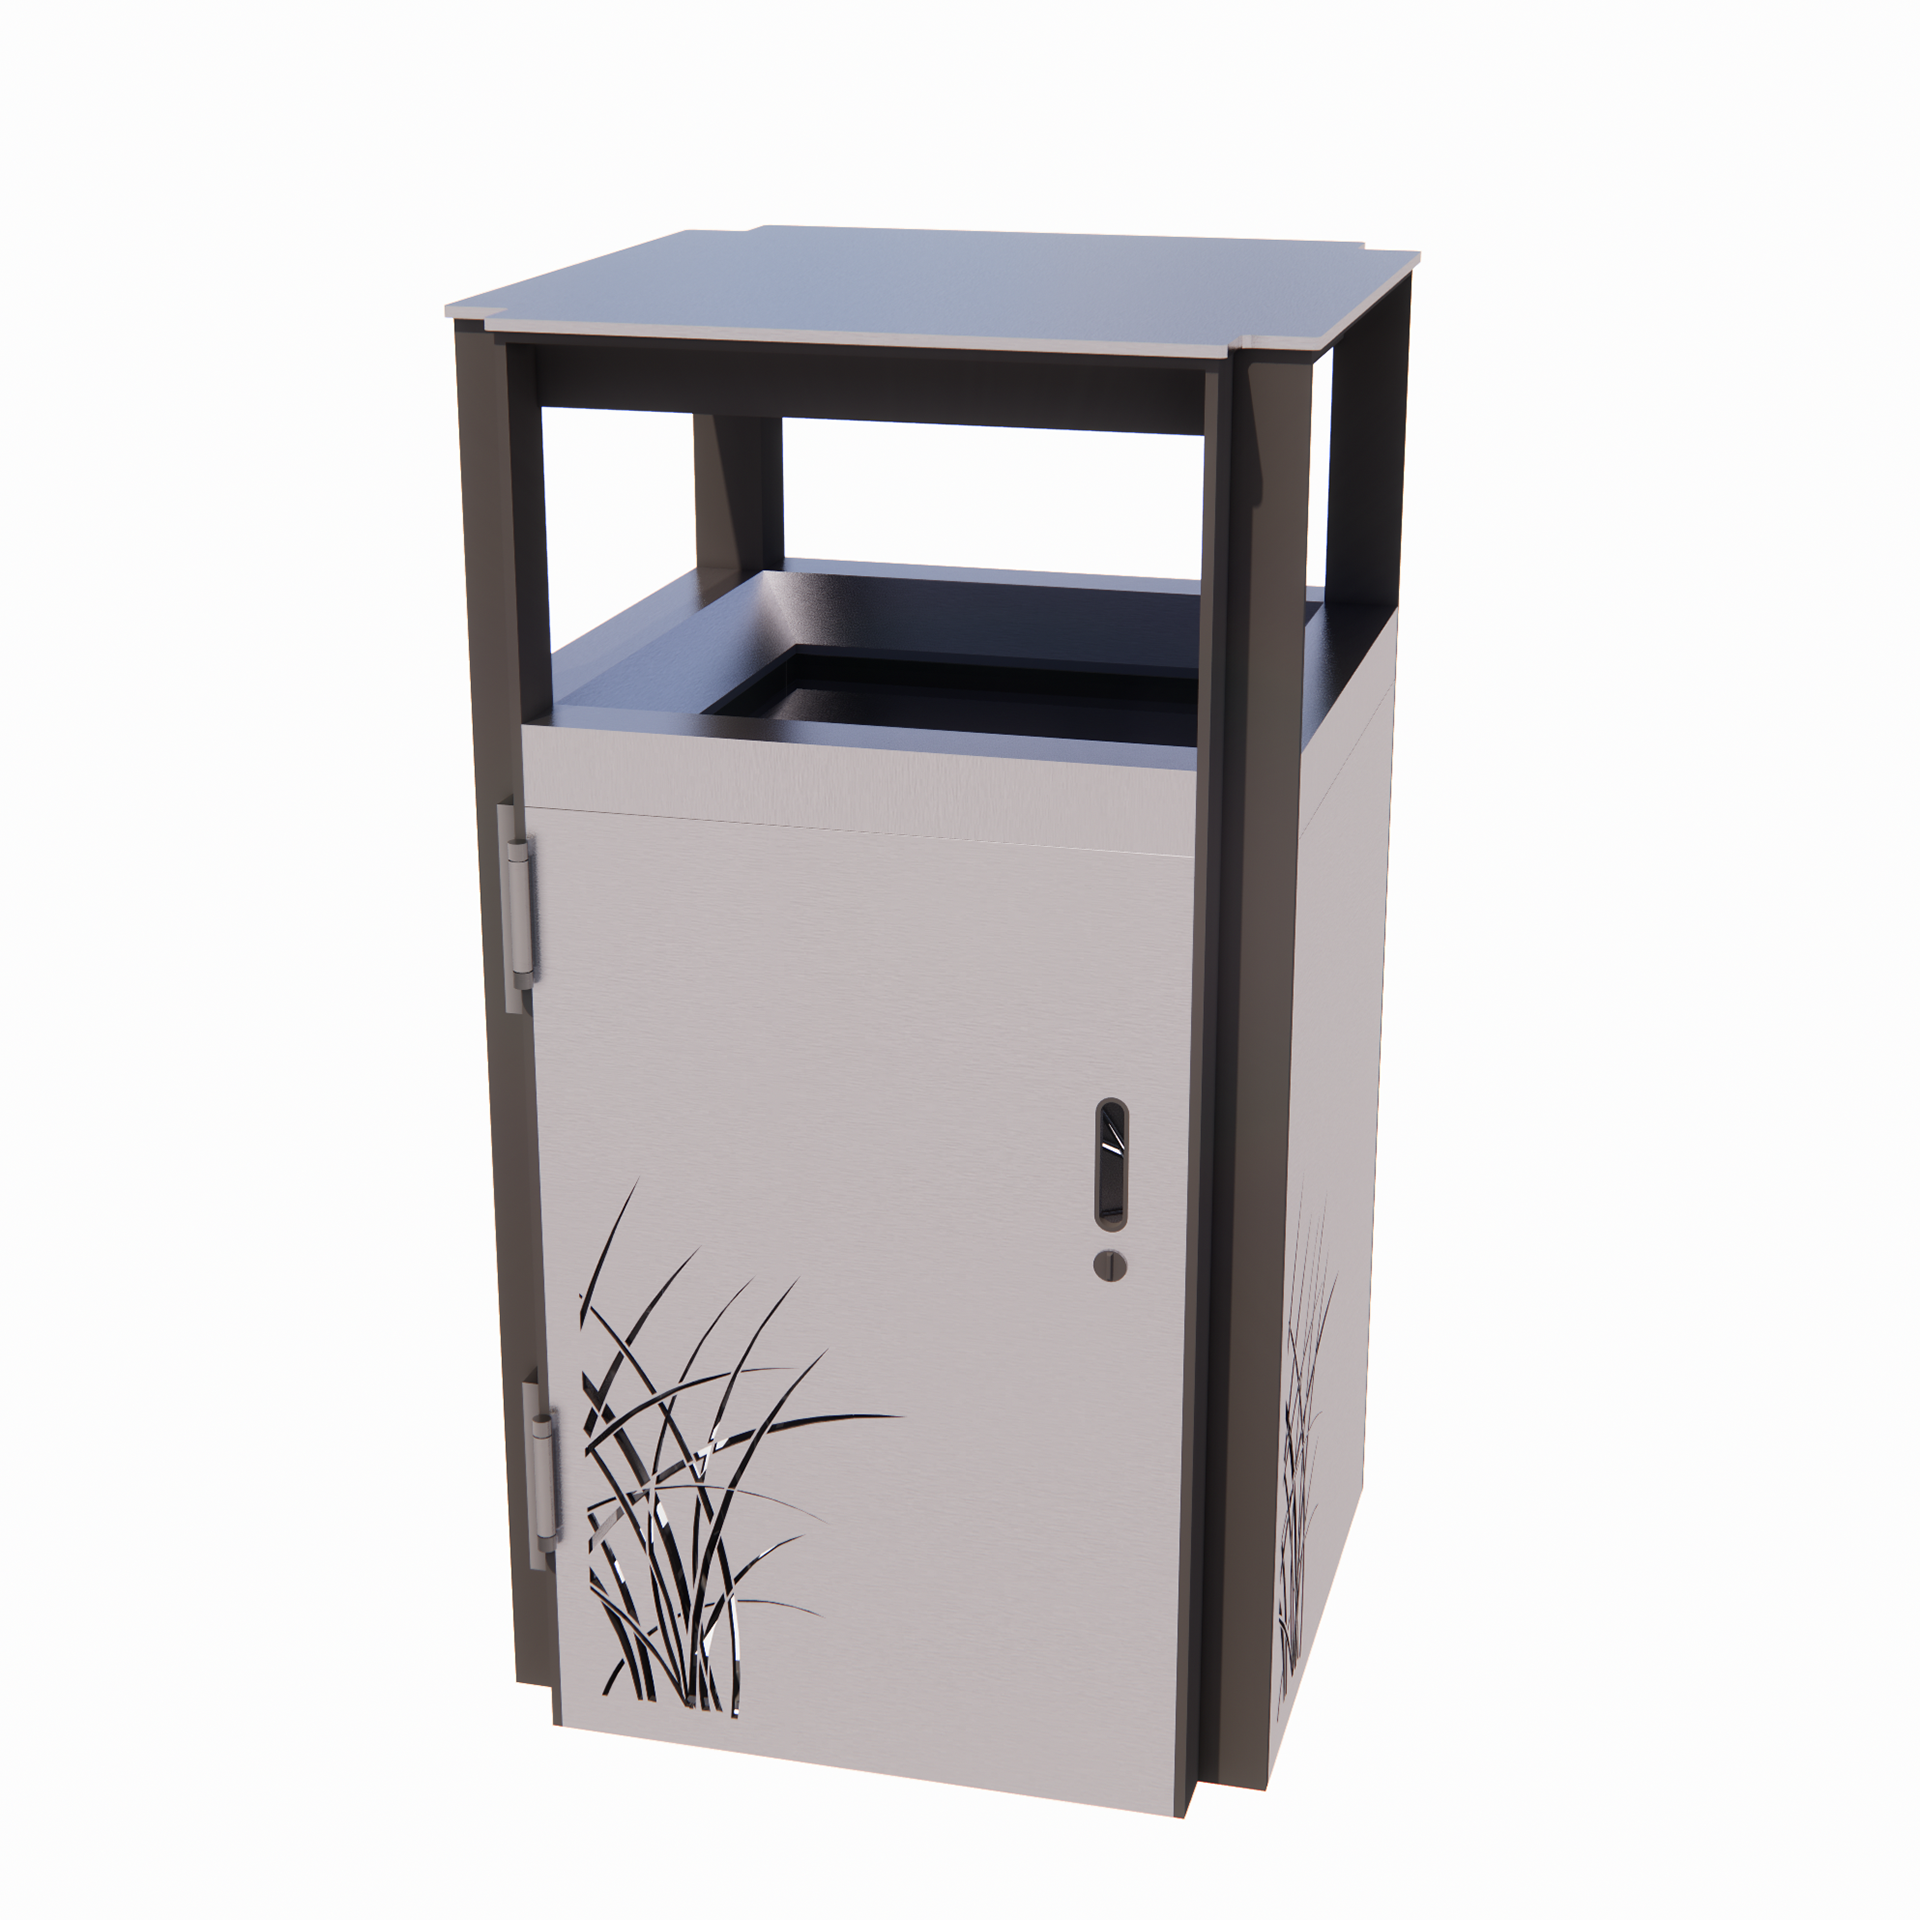 A silver-coloured rubbish bin. A raised roof provides protection to the bin with openings for putting in rubbish on all four sides. The side panels have a cut-out plant detail in the bottom left corner.